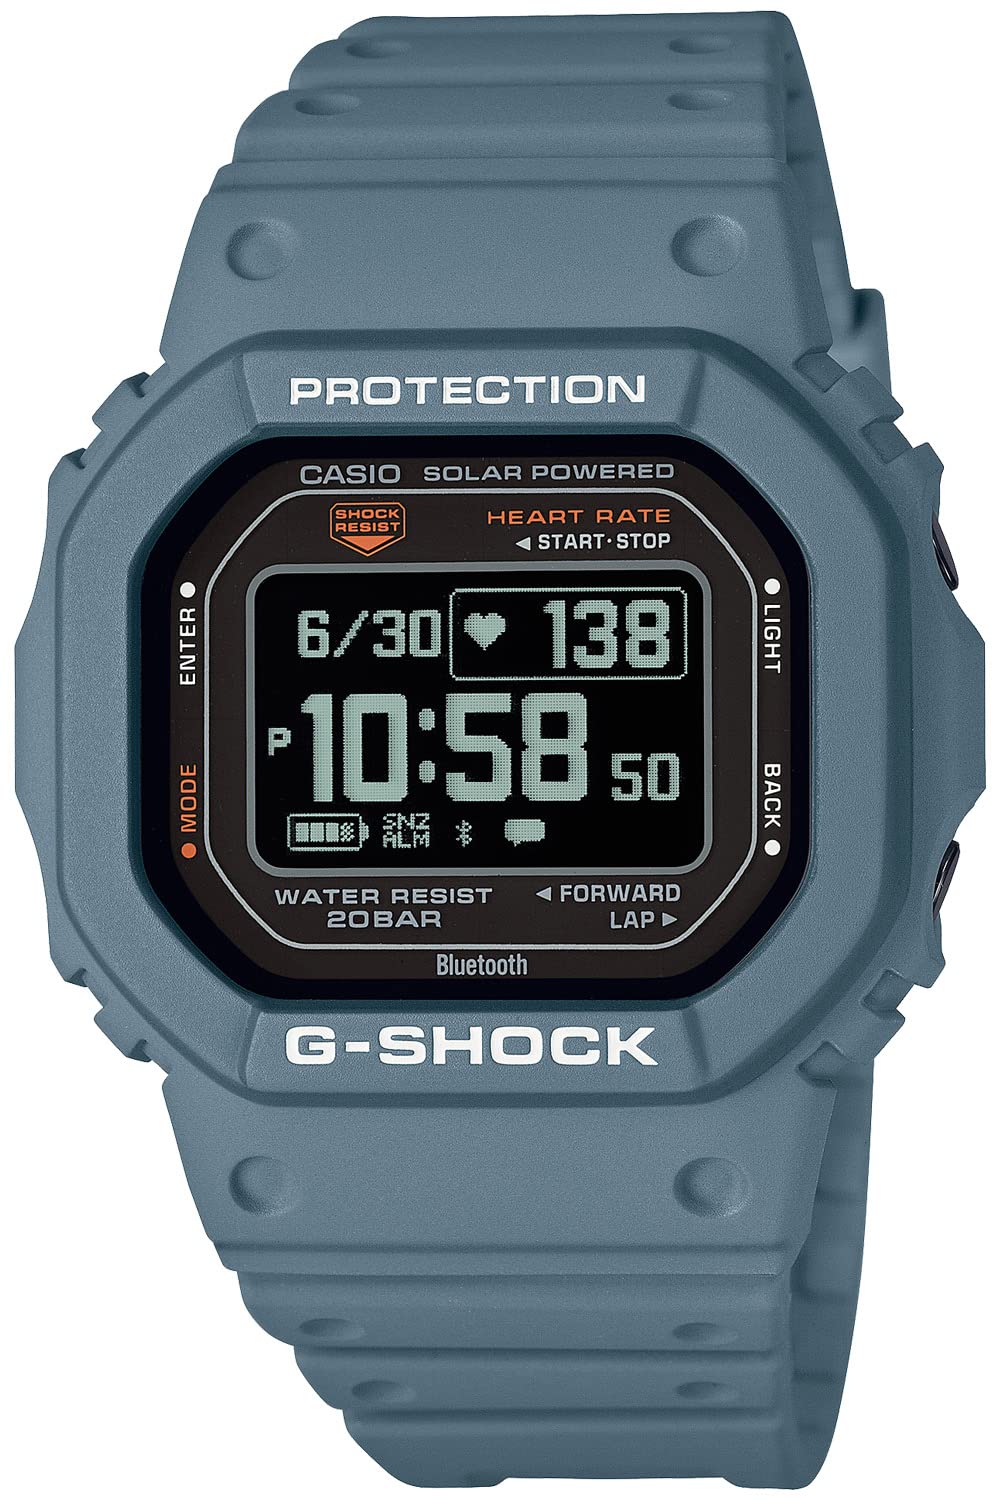 [Casio] G-Shock Watch [Domestic Genuine Product] G-SQUAD Heart Rate Monitor with Bluetooth DW-H5600-2JR Men's Pale Blue - BanzaiHobby